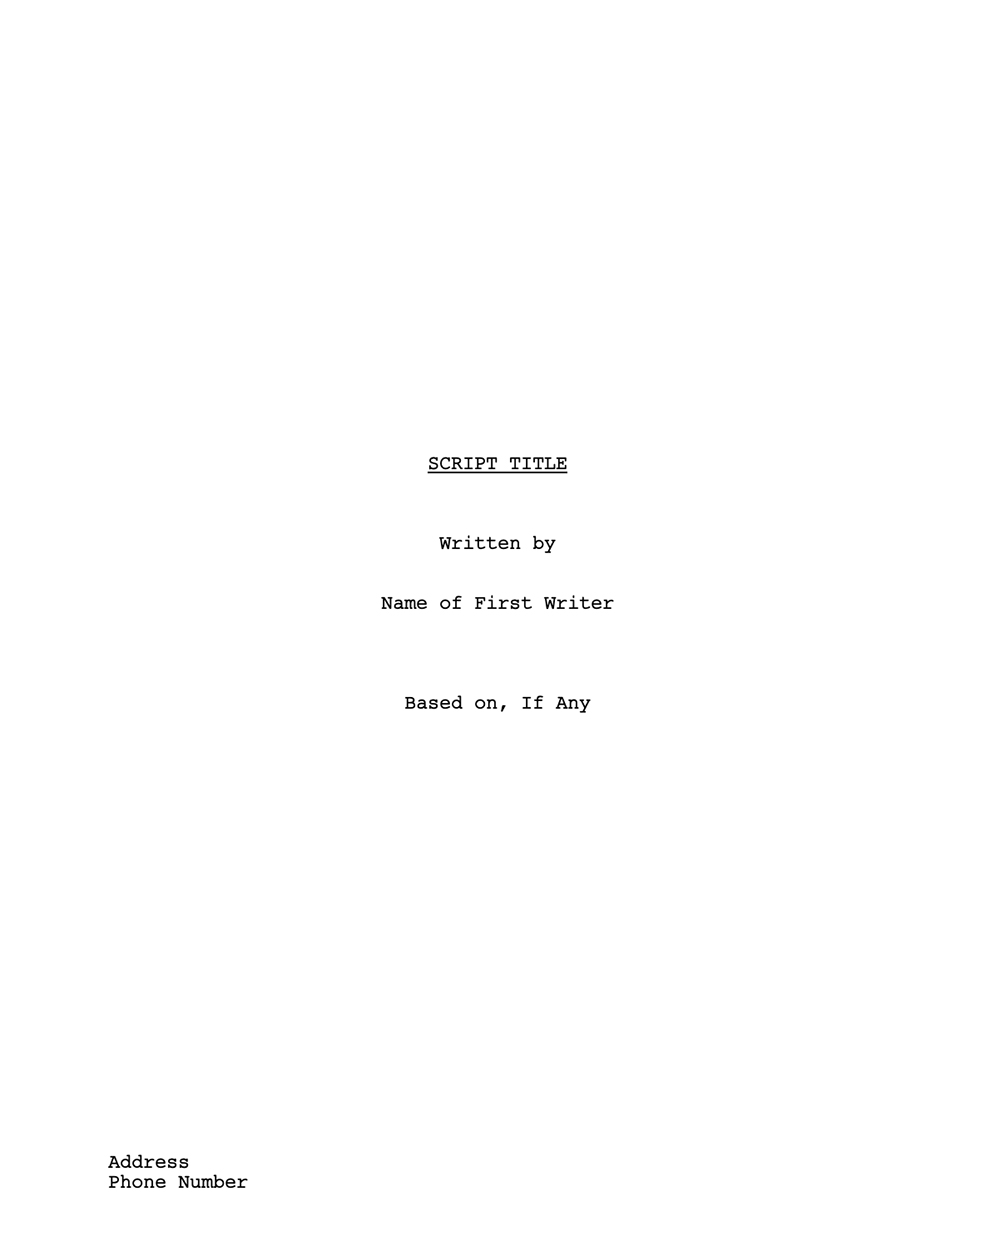 Example of blank script title page